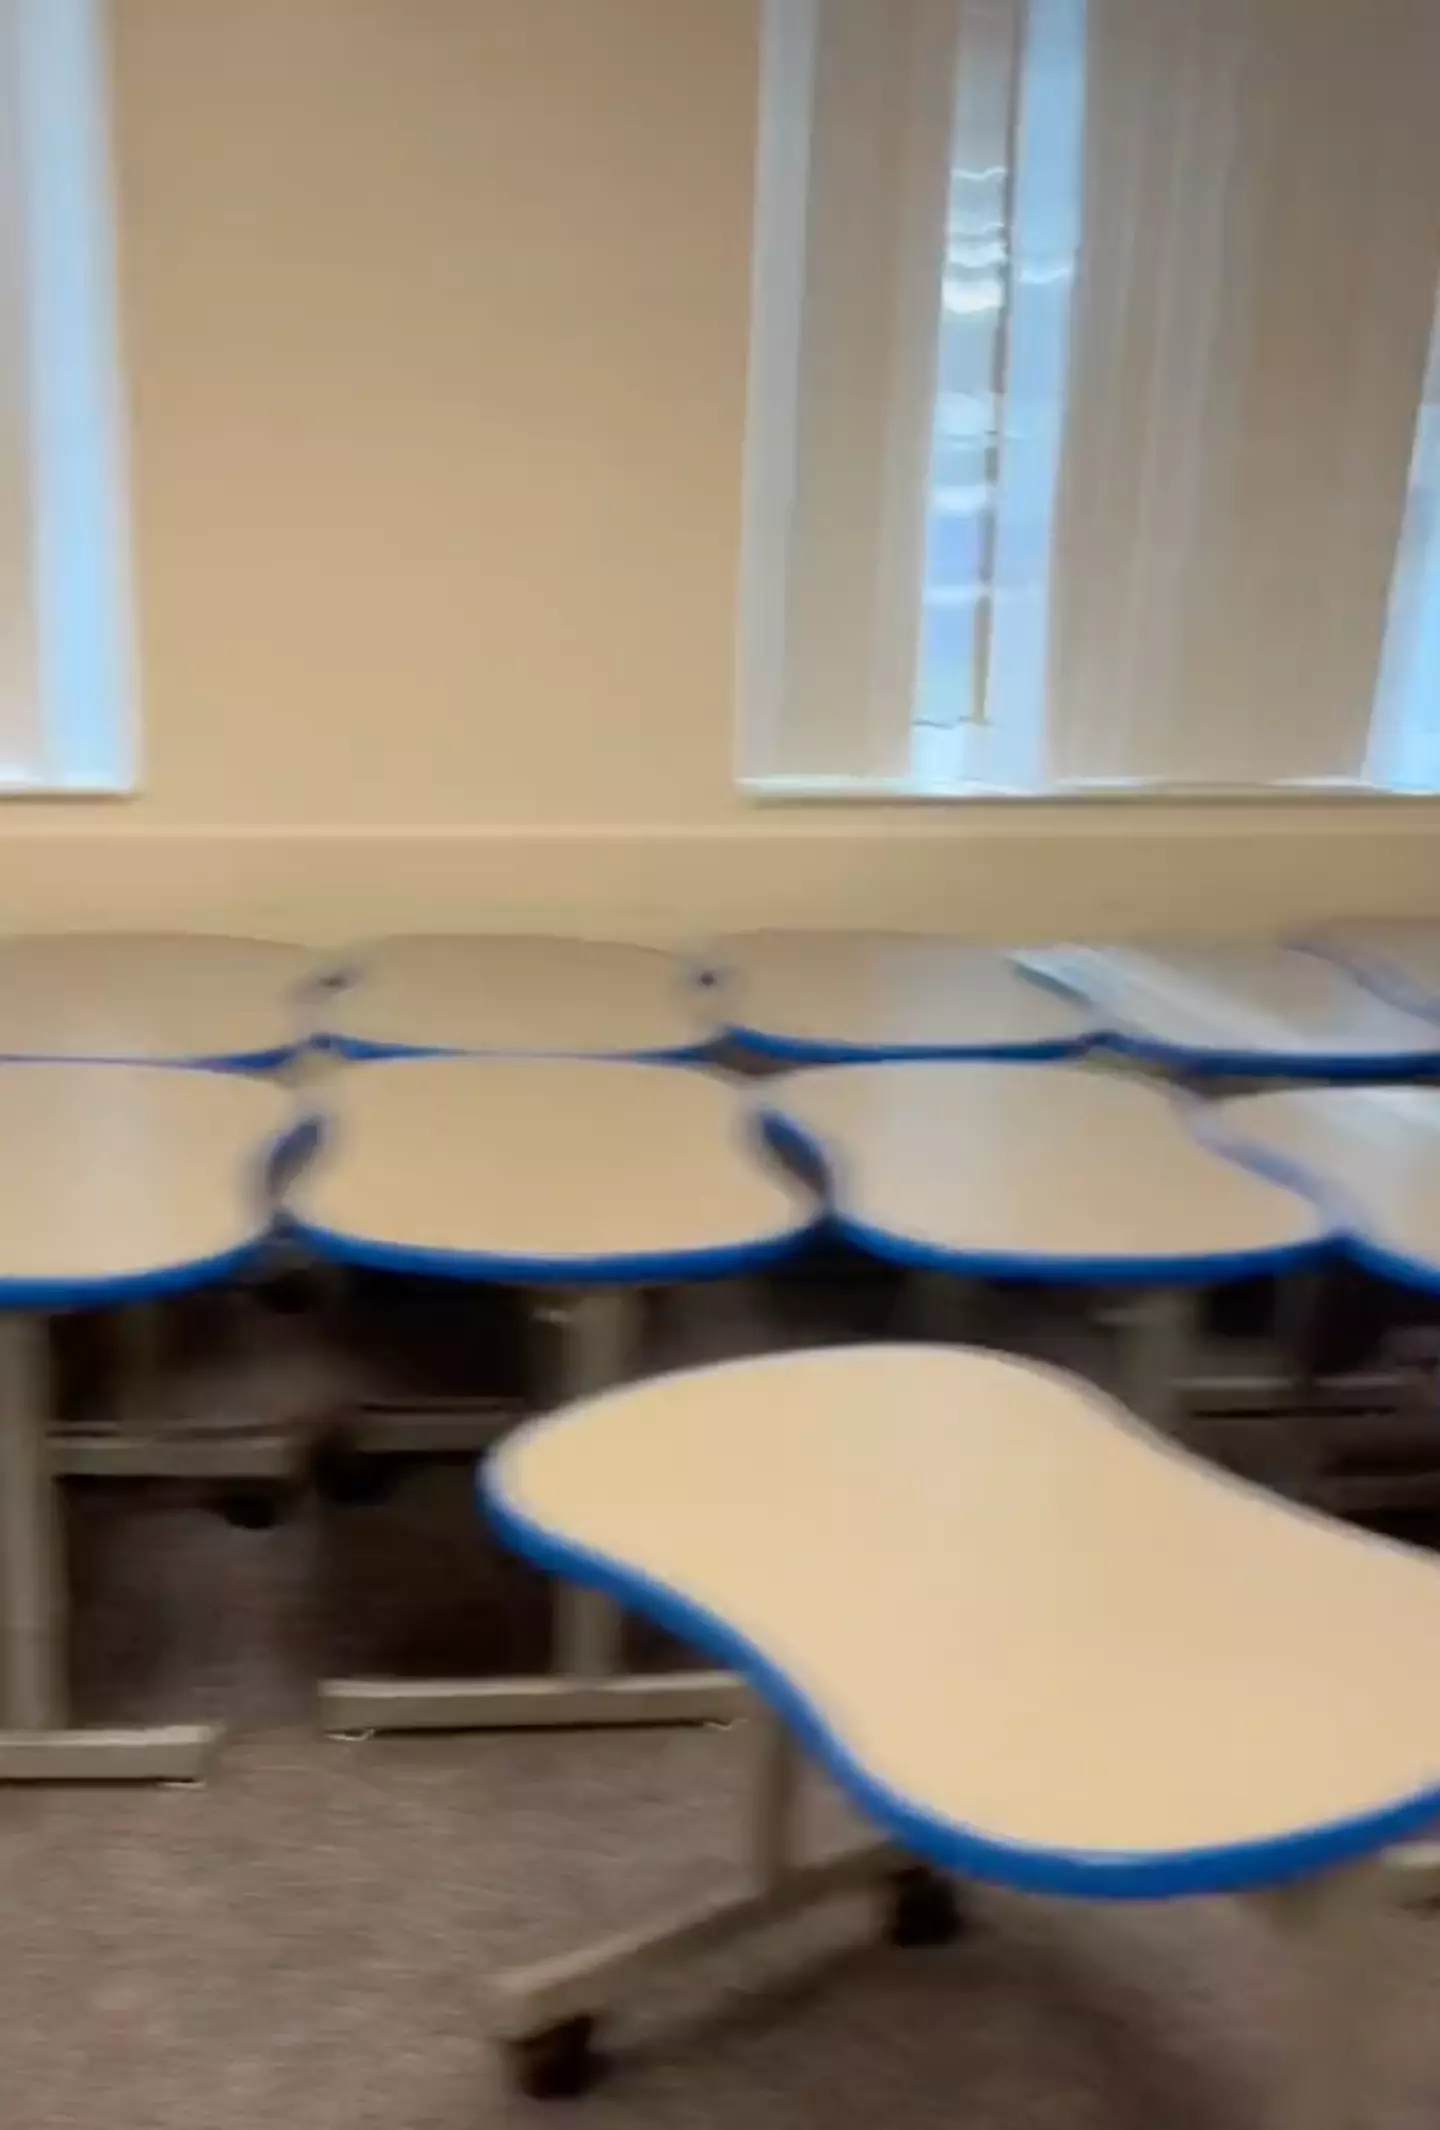 The classroom only had desks.